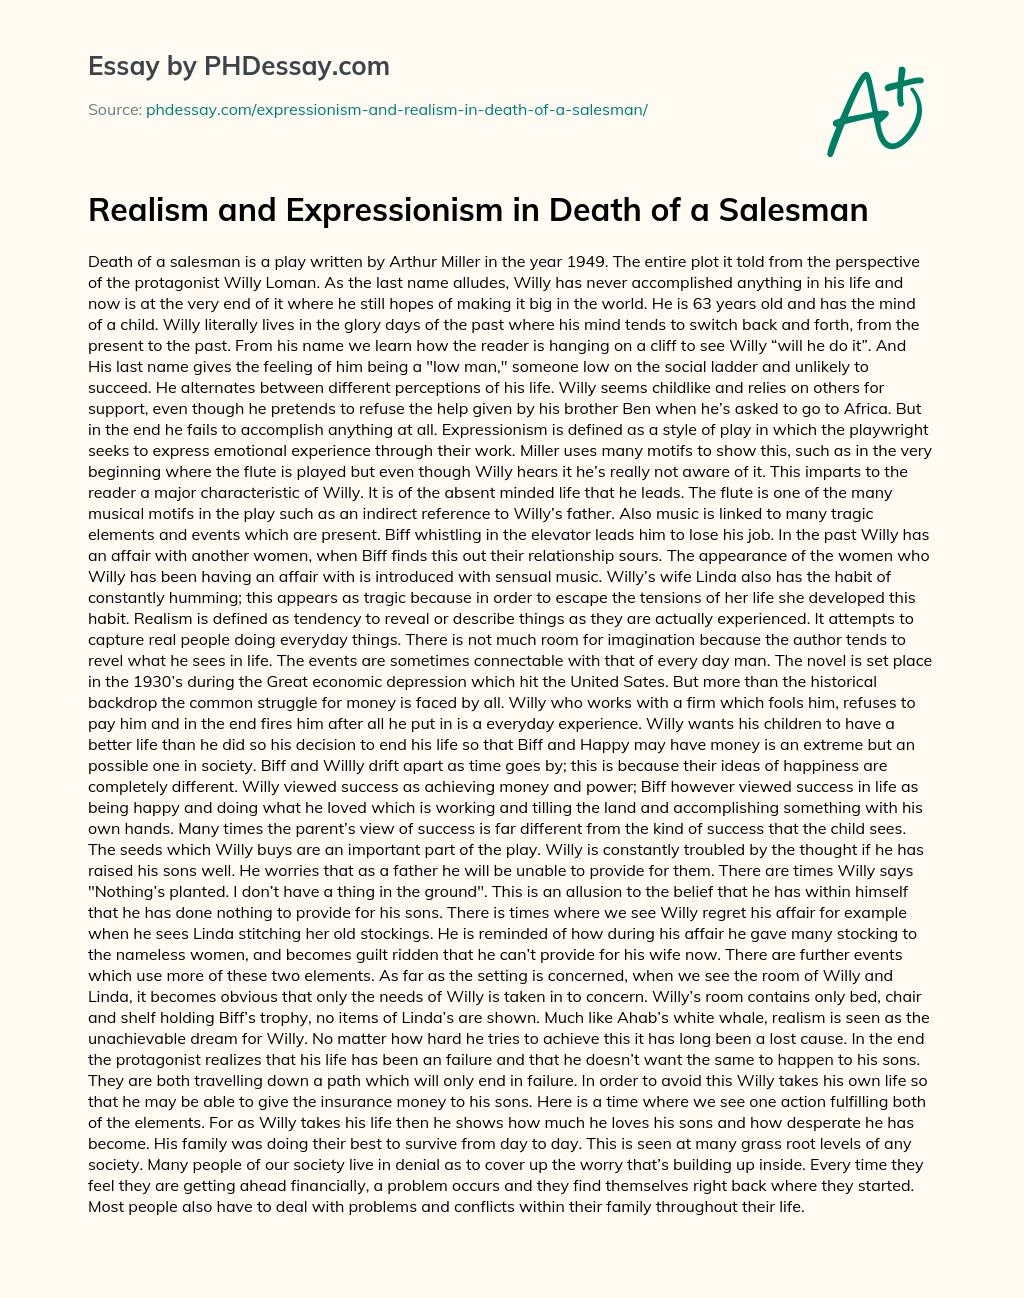 Realism and Expressionism in Death of a Salesman essay